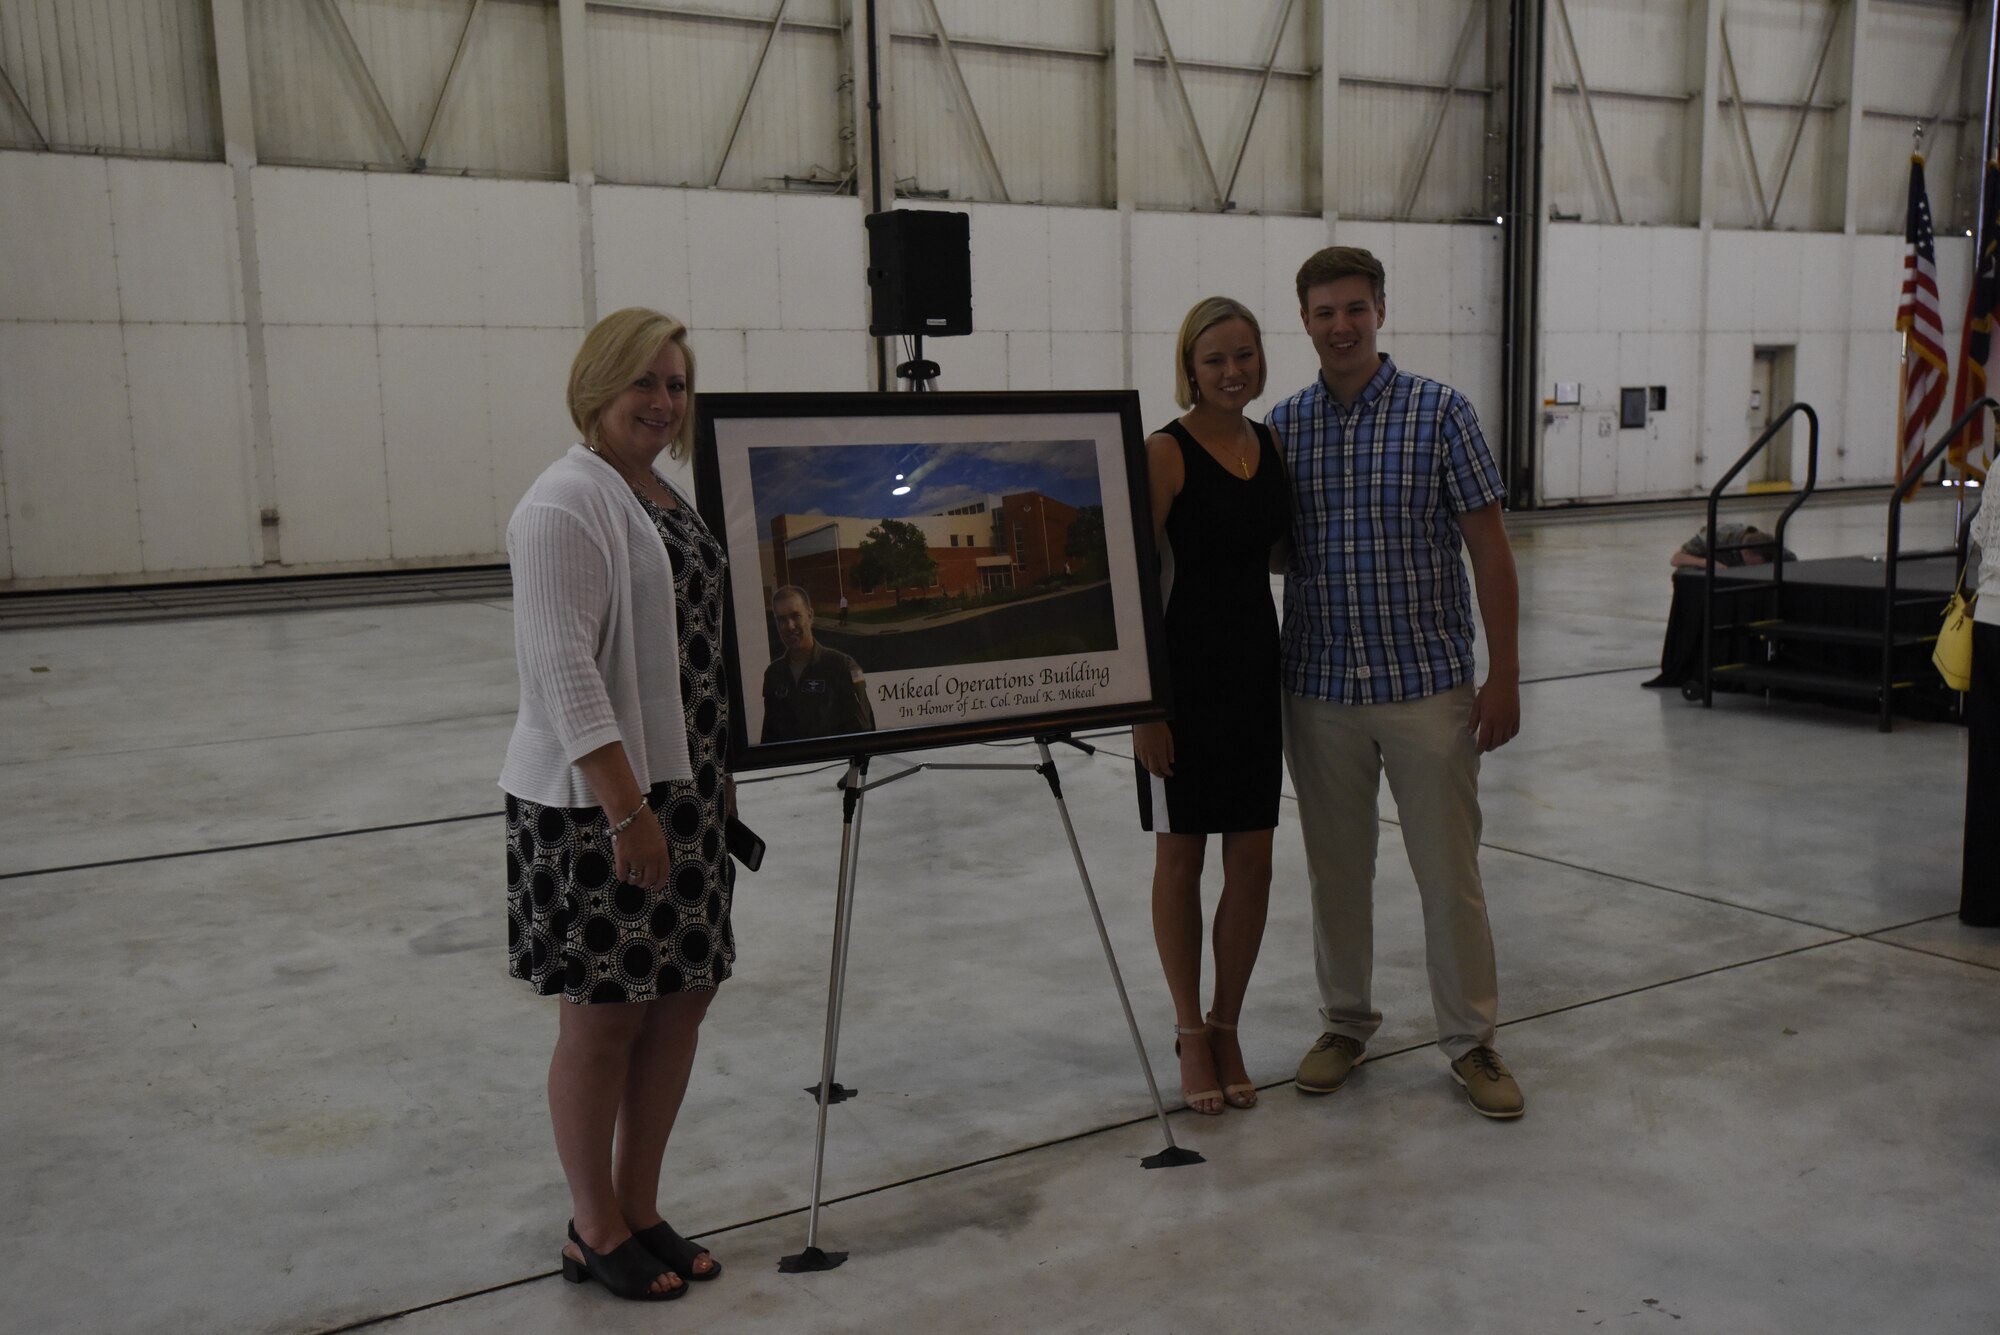 The family of U.S. Air Force Lt. Col. Joseph Mikeal pose next to a commemorative photo created for the 145th Airlift Wing building dedication ceremony at the North Carolina Air National Guard Base, Charlotte Douglas International Airport, June 9, 2019. Lt. Col. Mikeal was a member of the MAFFS 7 crew who passed away in an aircraft accident in 2012, the 145th Airlift Wing honored his and the other crew members sacrifice by naming four buildings across the wing after each one.